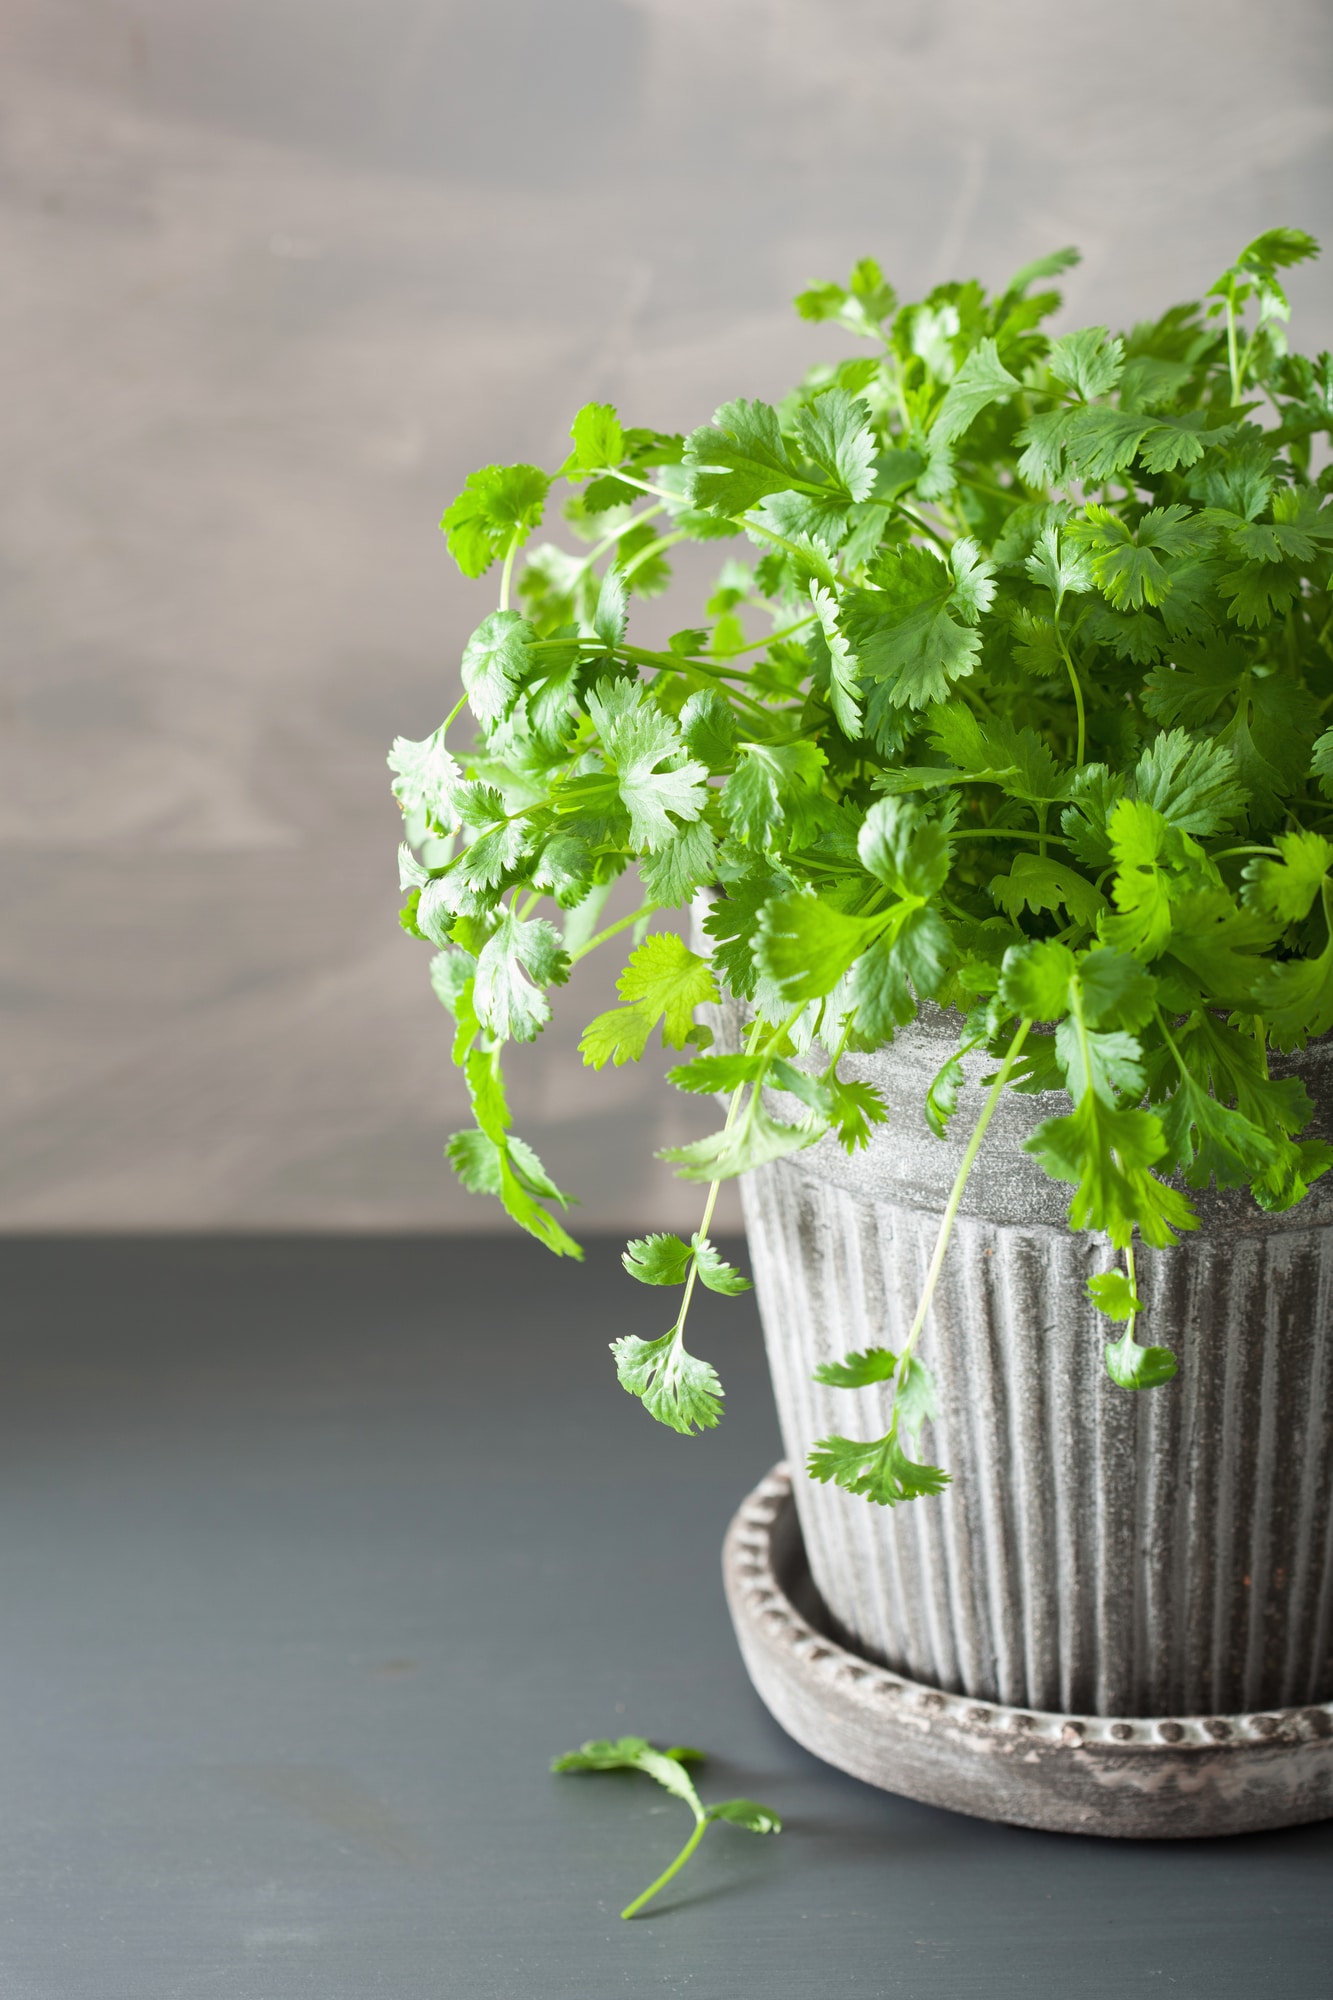 How to Grow Cilantro in a Pot